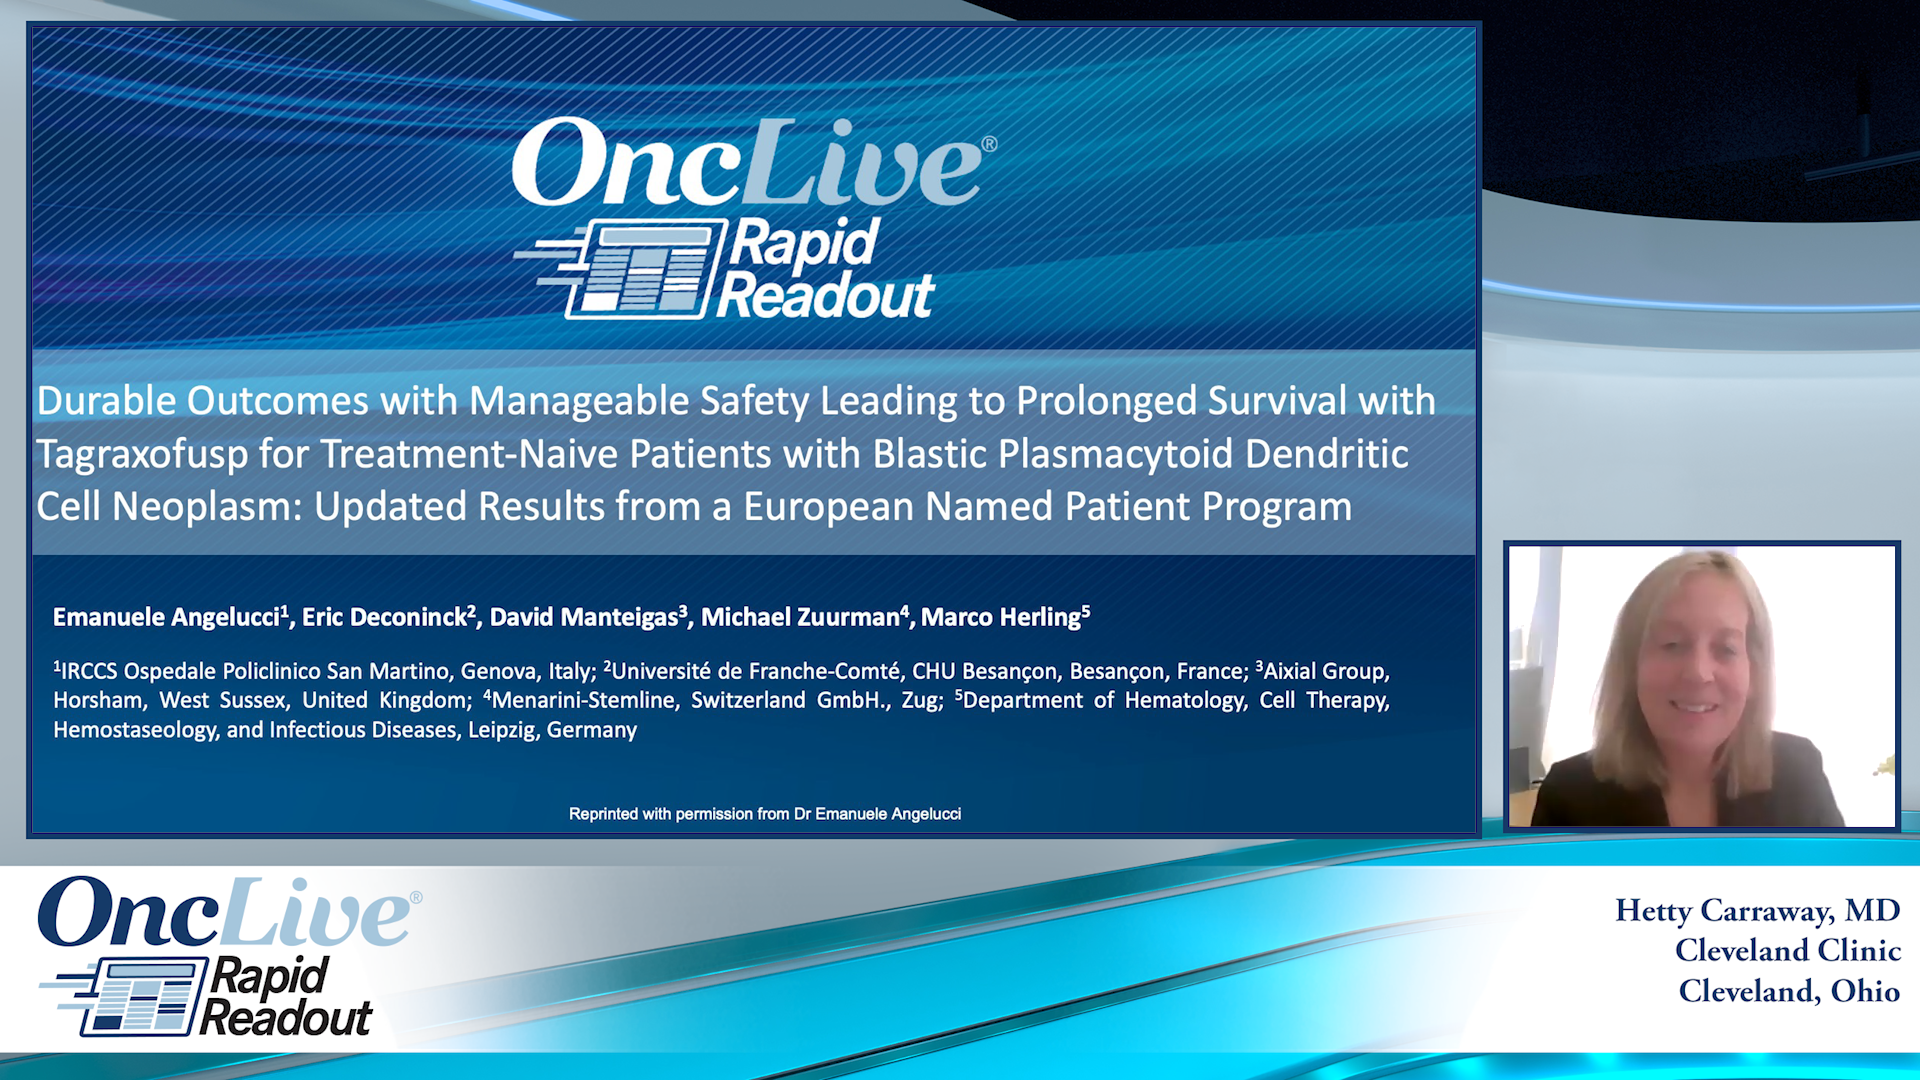 Durable Outcomes with Manageable Safety Leading to Prolonged Survival with Tagraxofusp for Treatment-Naive Patients with Blastic Plasmacytoid Dendritic Cell Neoplasm: Updated Results from a European Named Patient Program